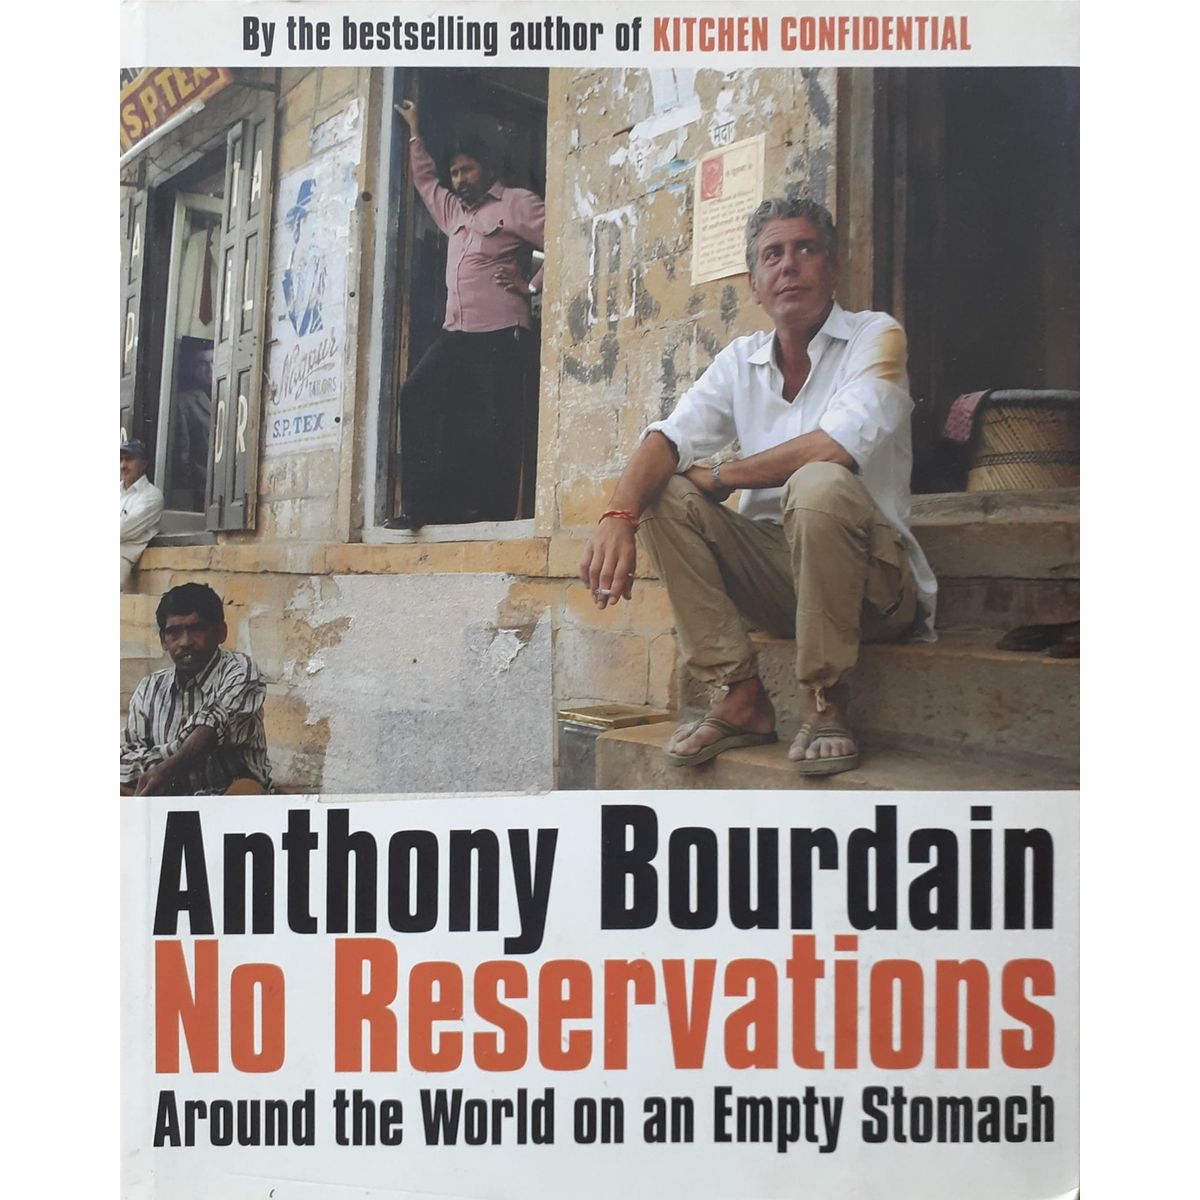 ISBN: 9780747594123 / 0747594120 - No Reservations: Around the World on an Empty Stomach by Anthony Bourdain [2007]